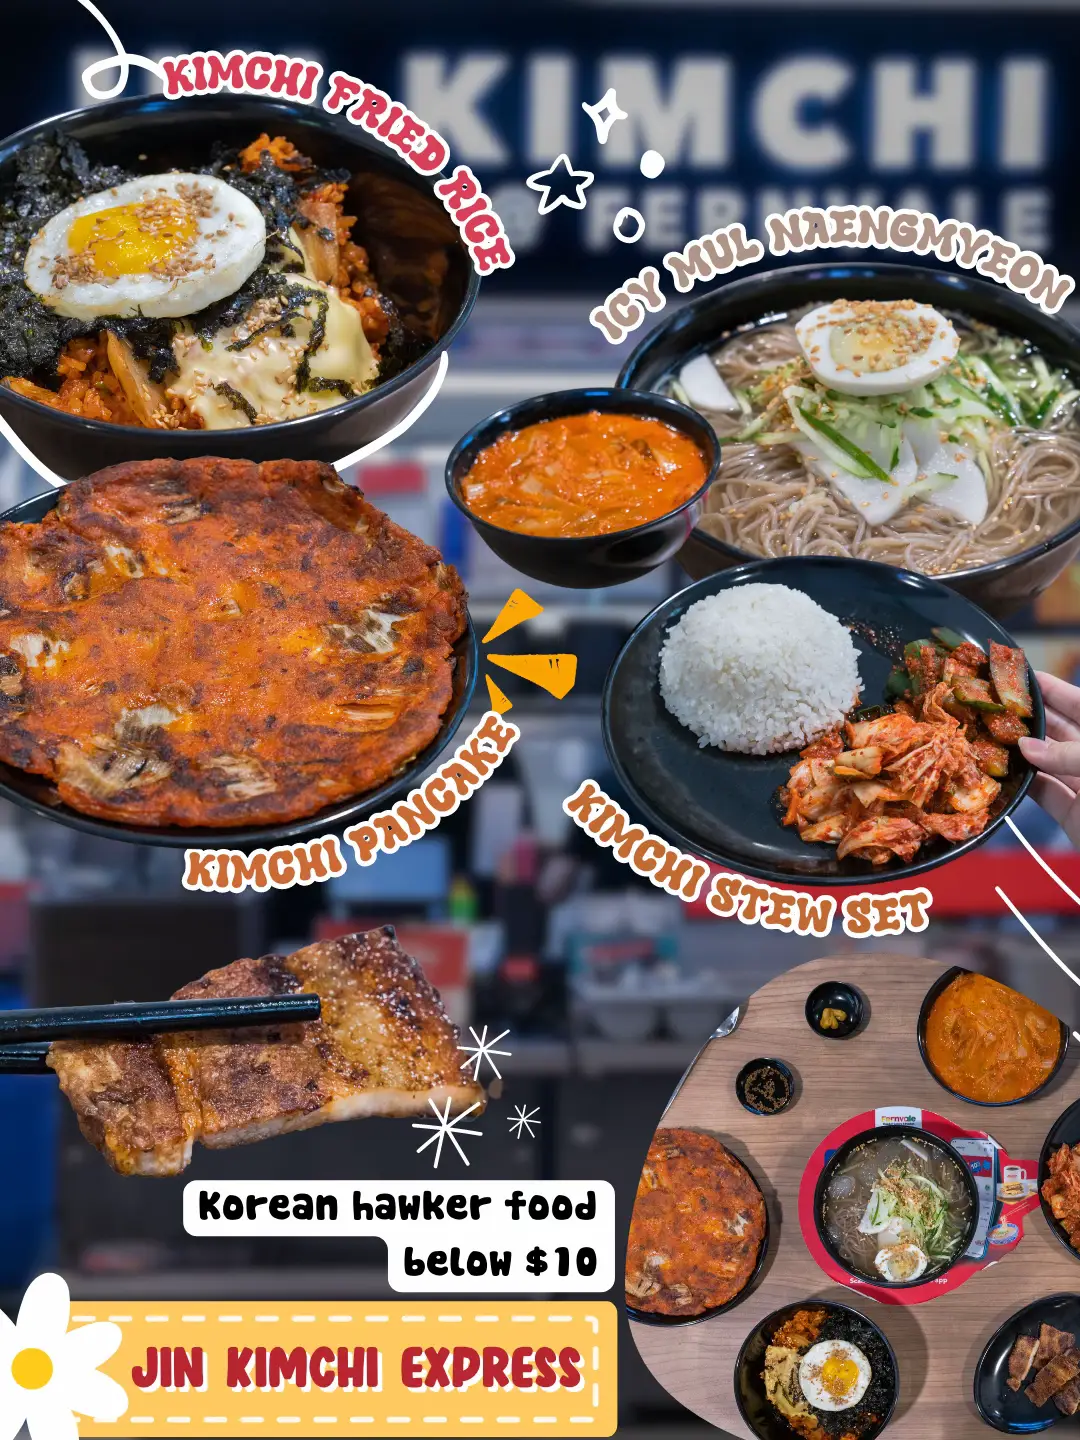 7 underrated Korean food places in SG 🇰🇷's images(6)